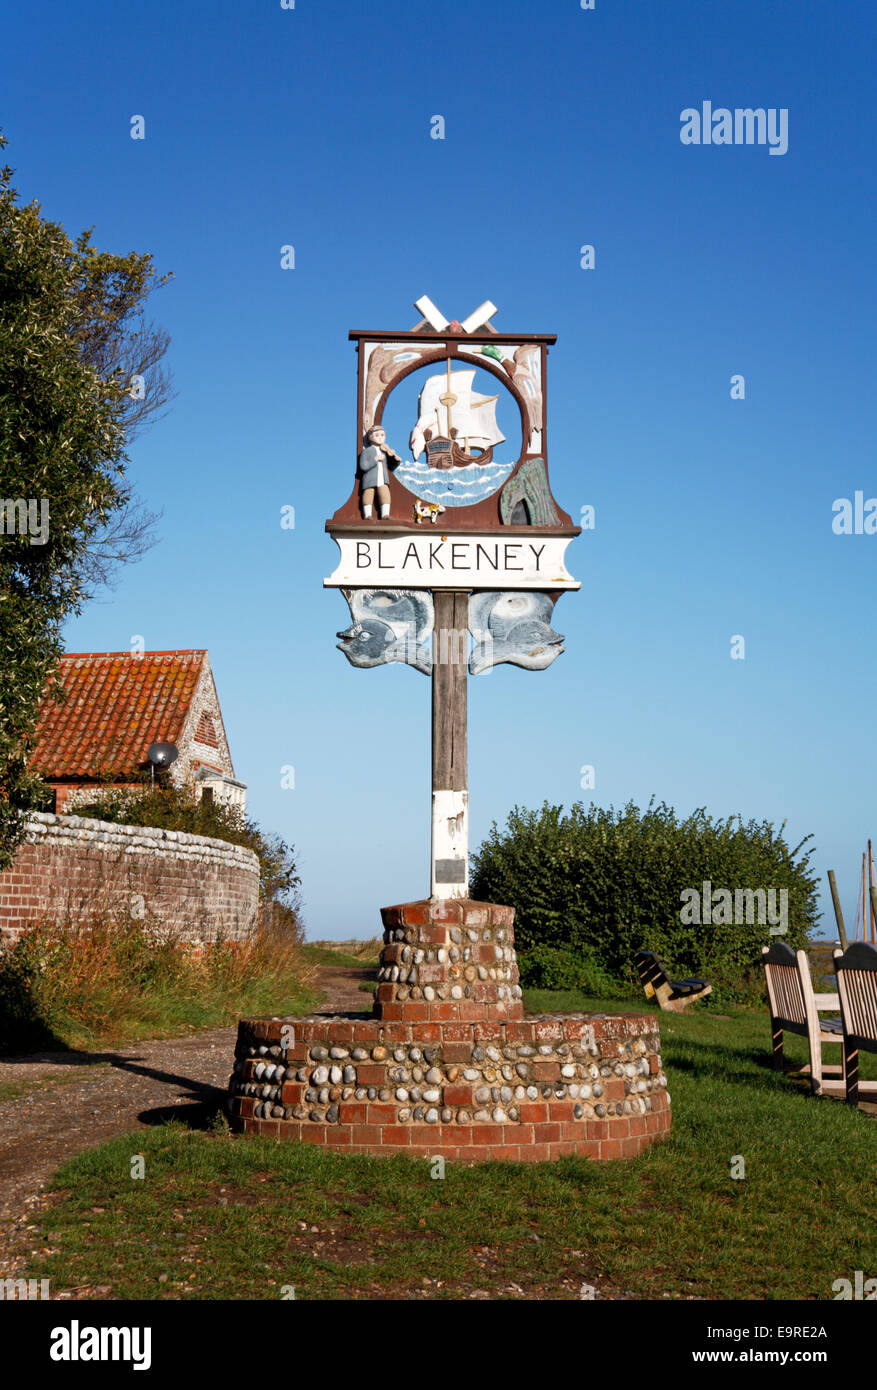 A view of the village sign at Blakeney, Norfolk, England, United Kingdom. Stock Photo